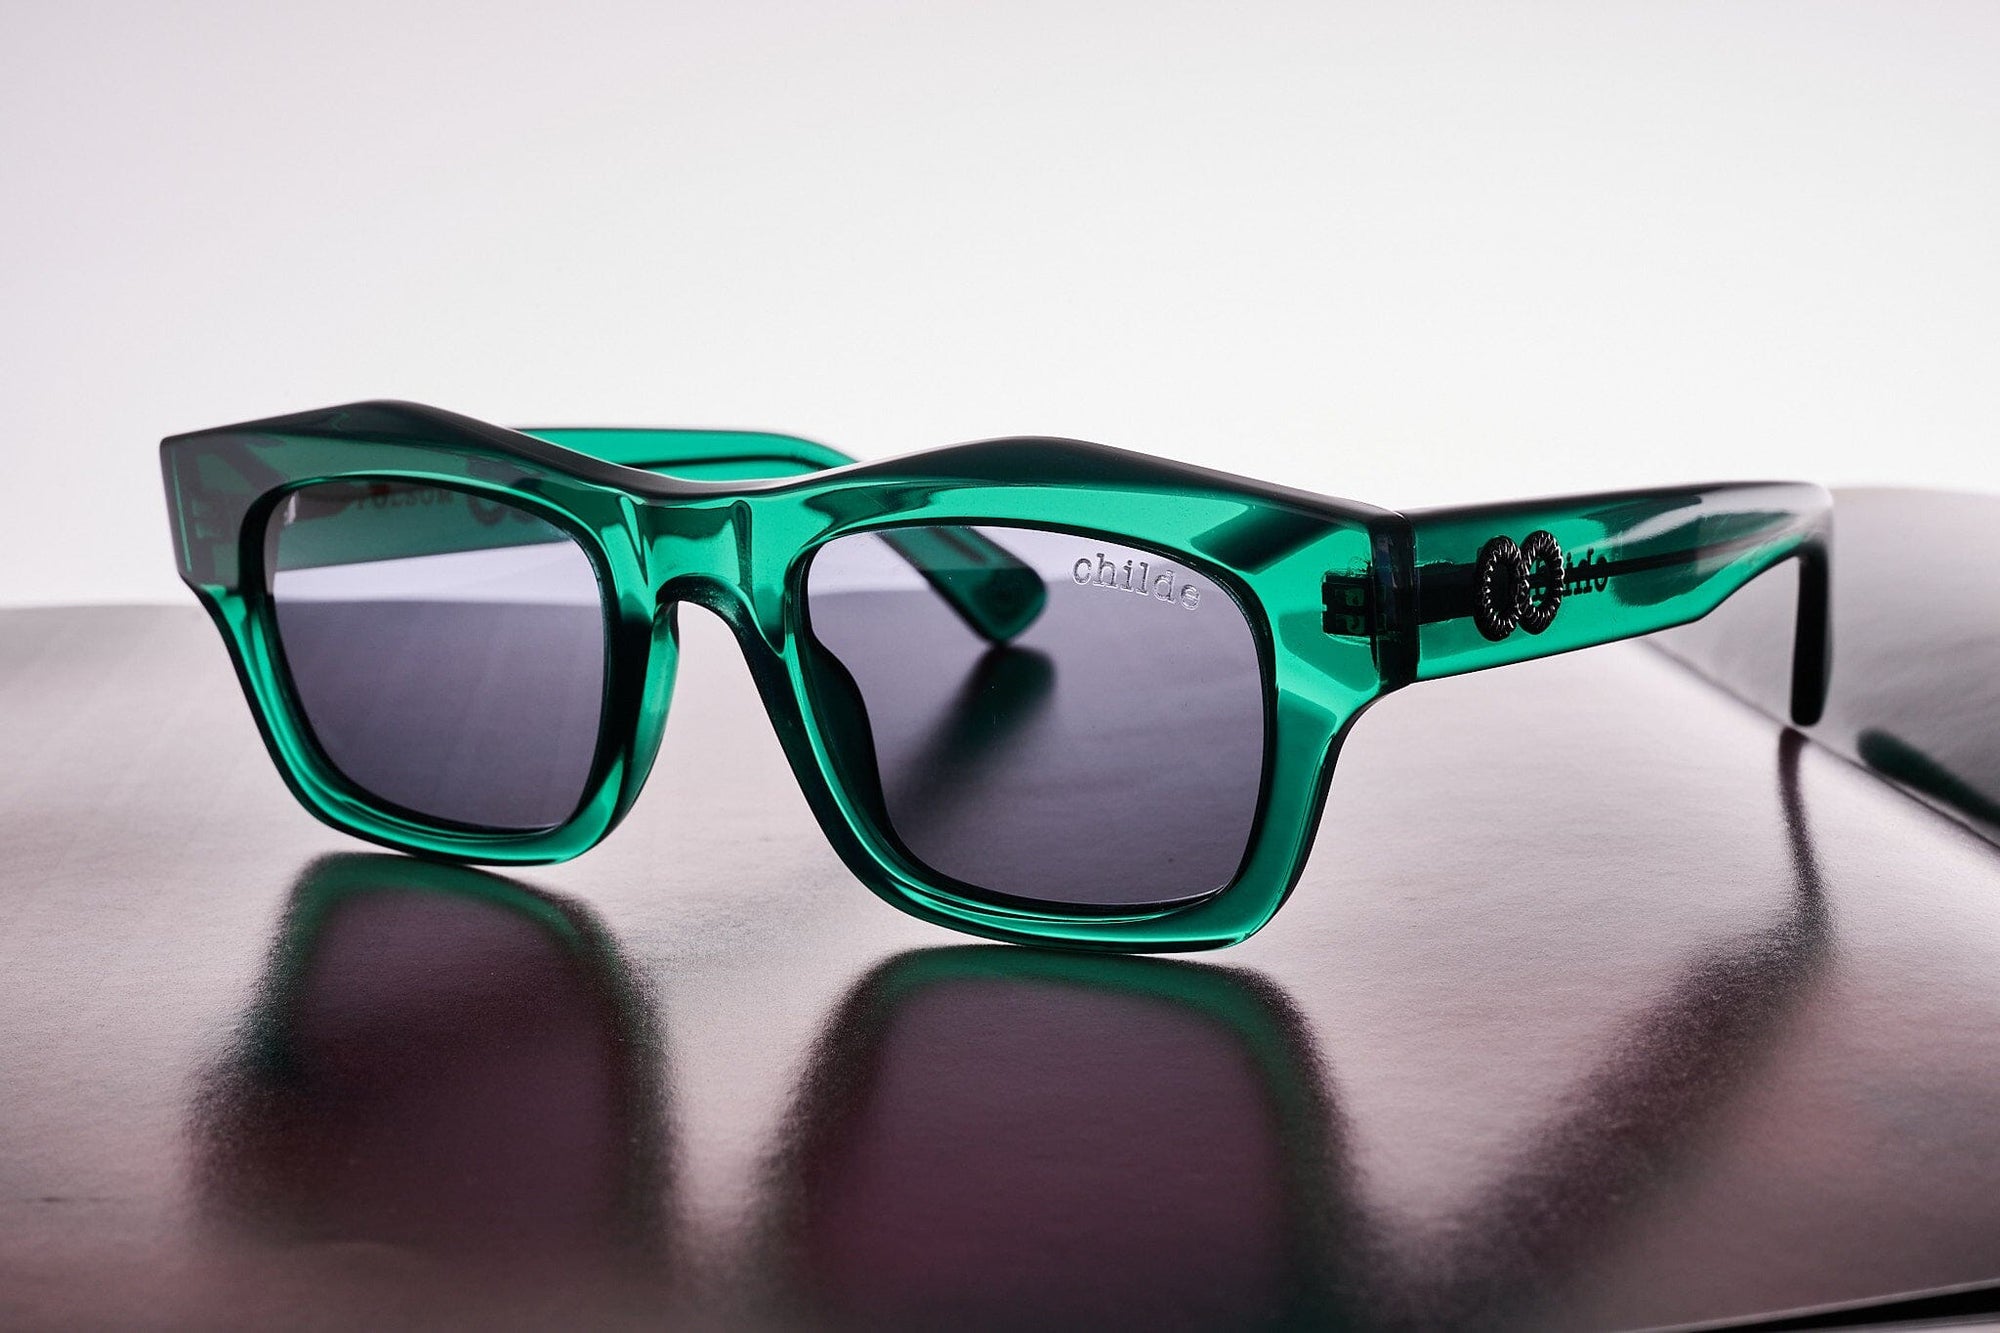 Childe Eyewear: Quality, Style, and Eco-Consciousness in Every Pair